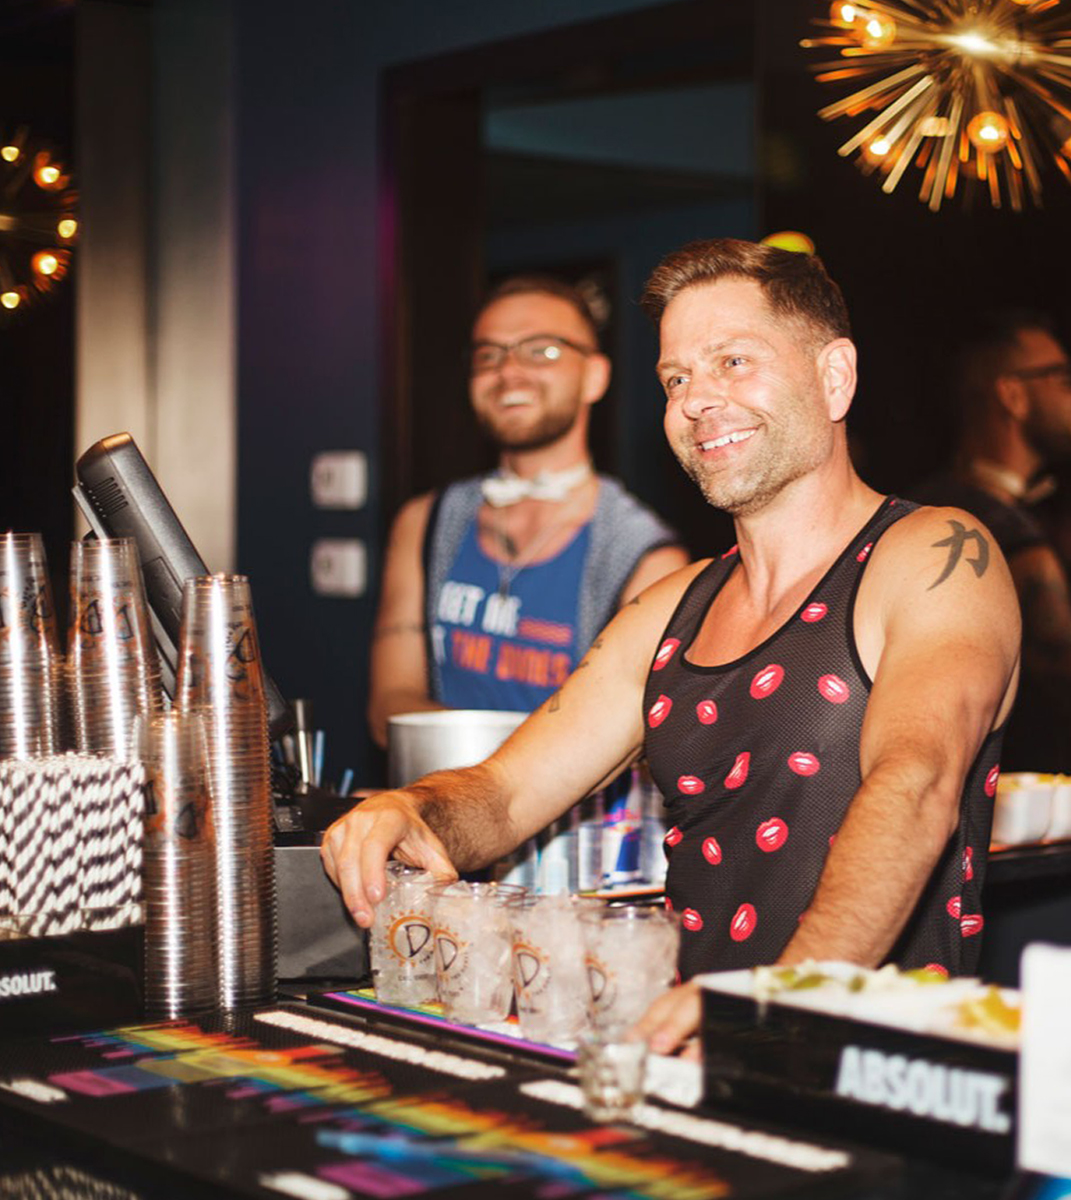 A Dunes Resort worker stands behind the bar making drinks and smiling at guests.